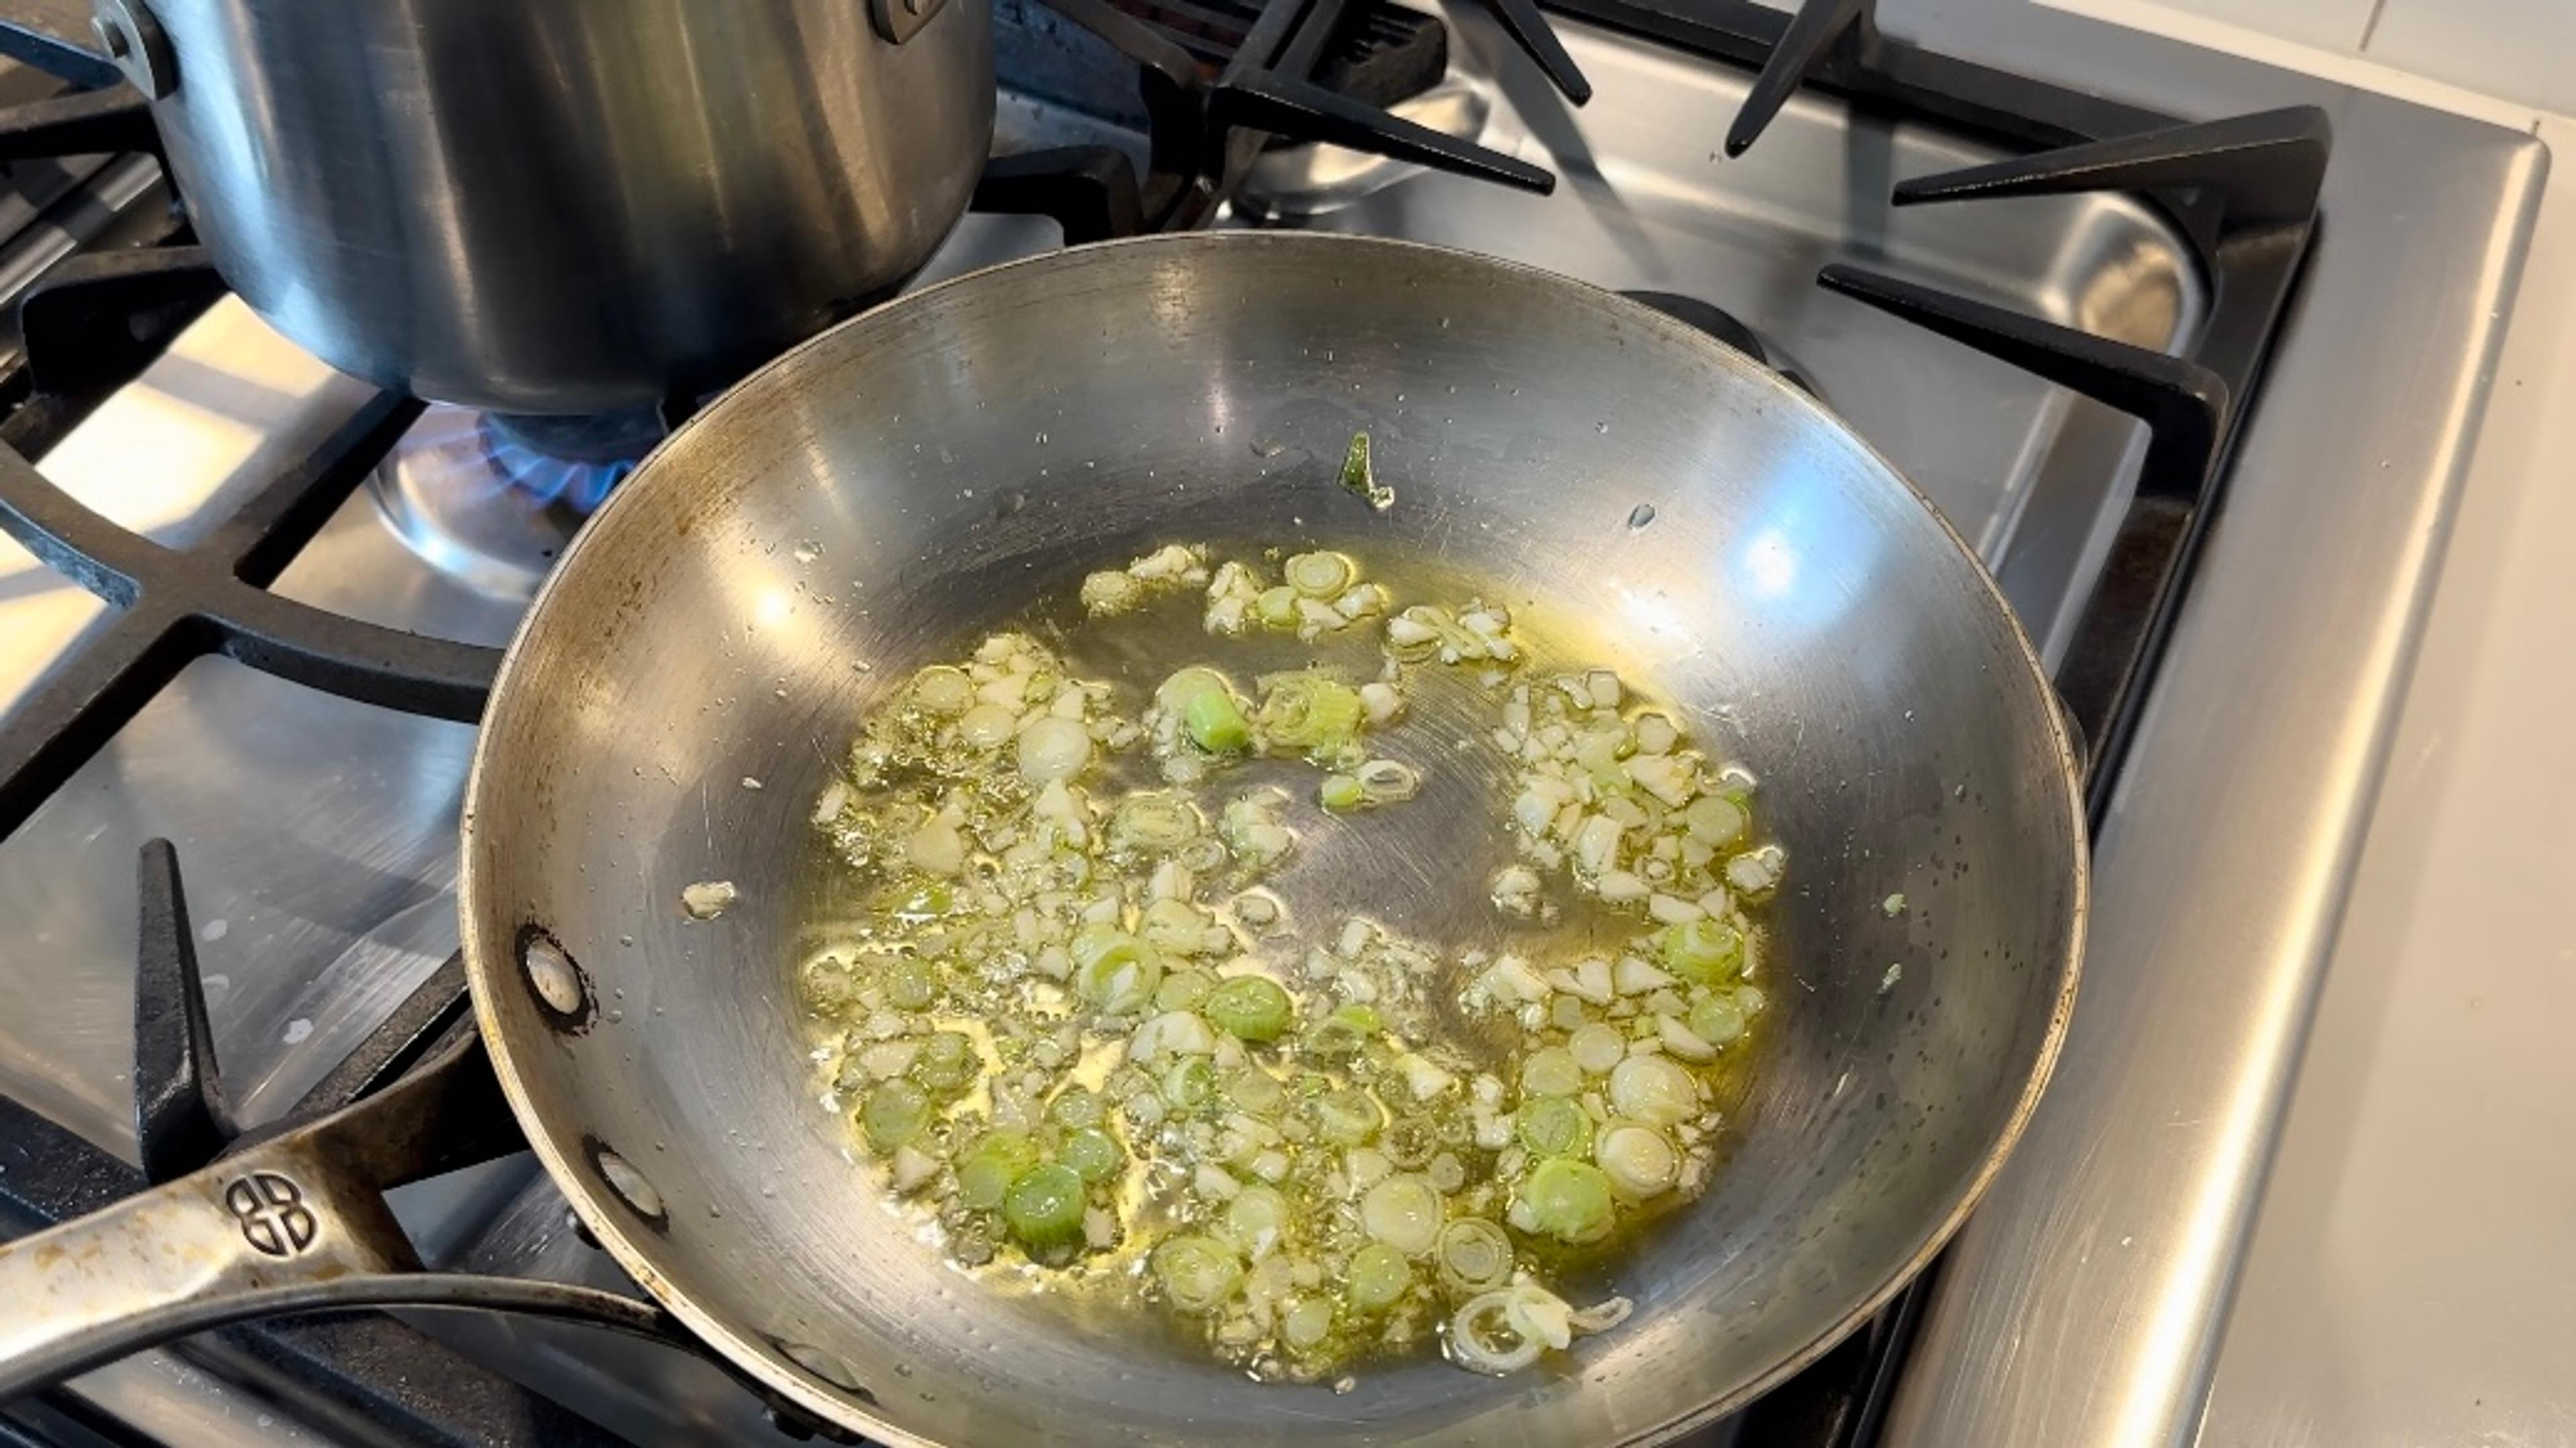 In a large pan, heat 3 tablespoons of garlic oil over medium-low heat, reserving the remaining oil for the broccolini. Add garlic and green onion whites, reserving the greens for garnish. Allow to sizzle until fragrant and golden.